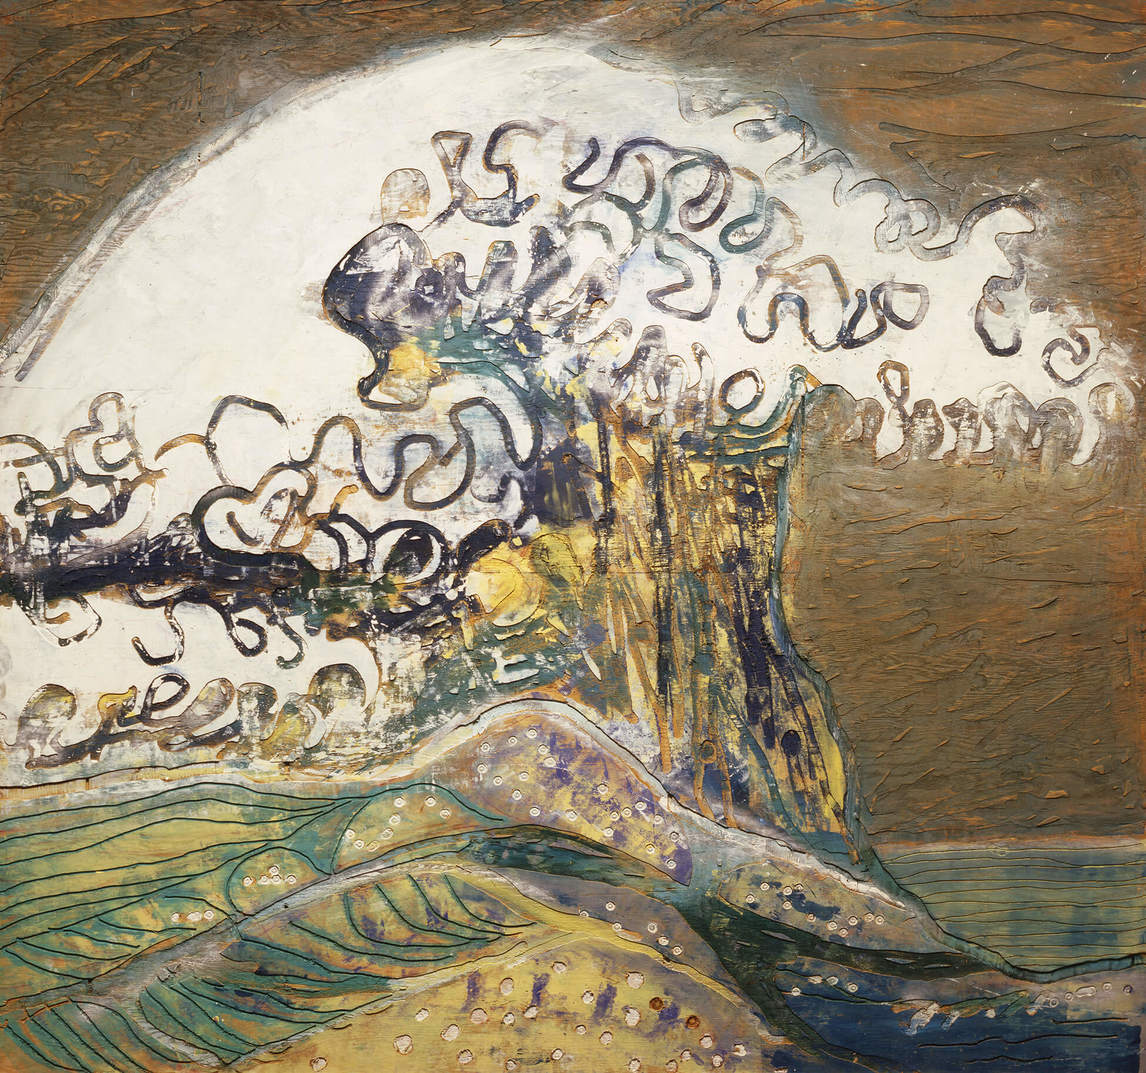 Paterson Ewen, The Great Wave—Homage to Hokusai, 1974